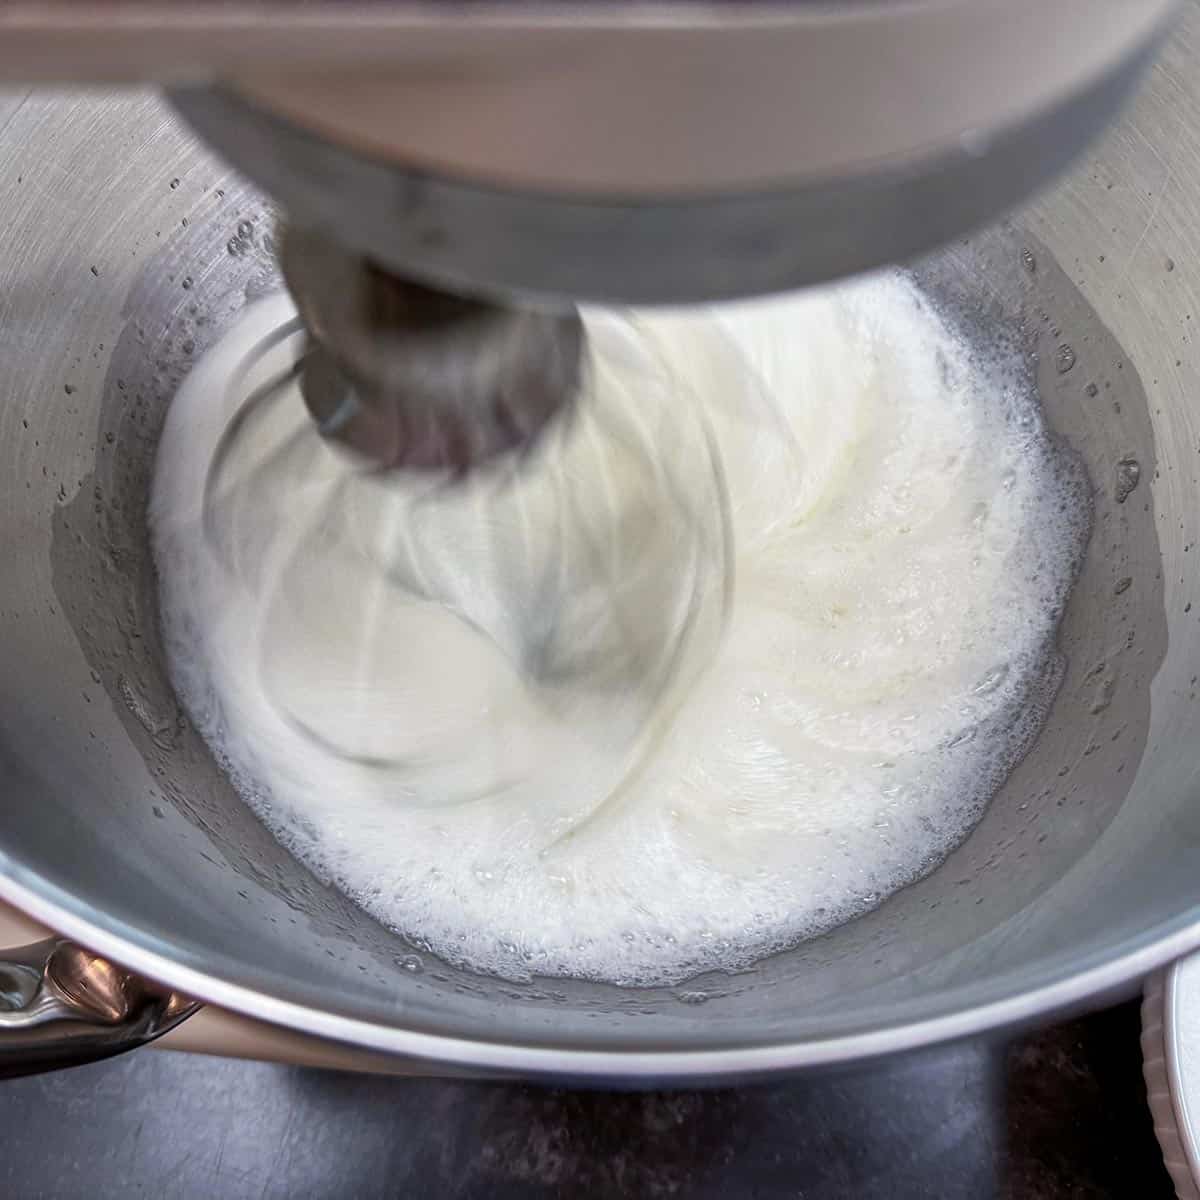 Egg white that are frothy in mixer bowl.